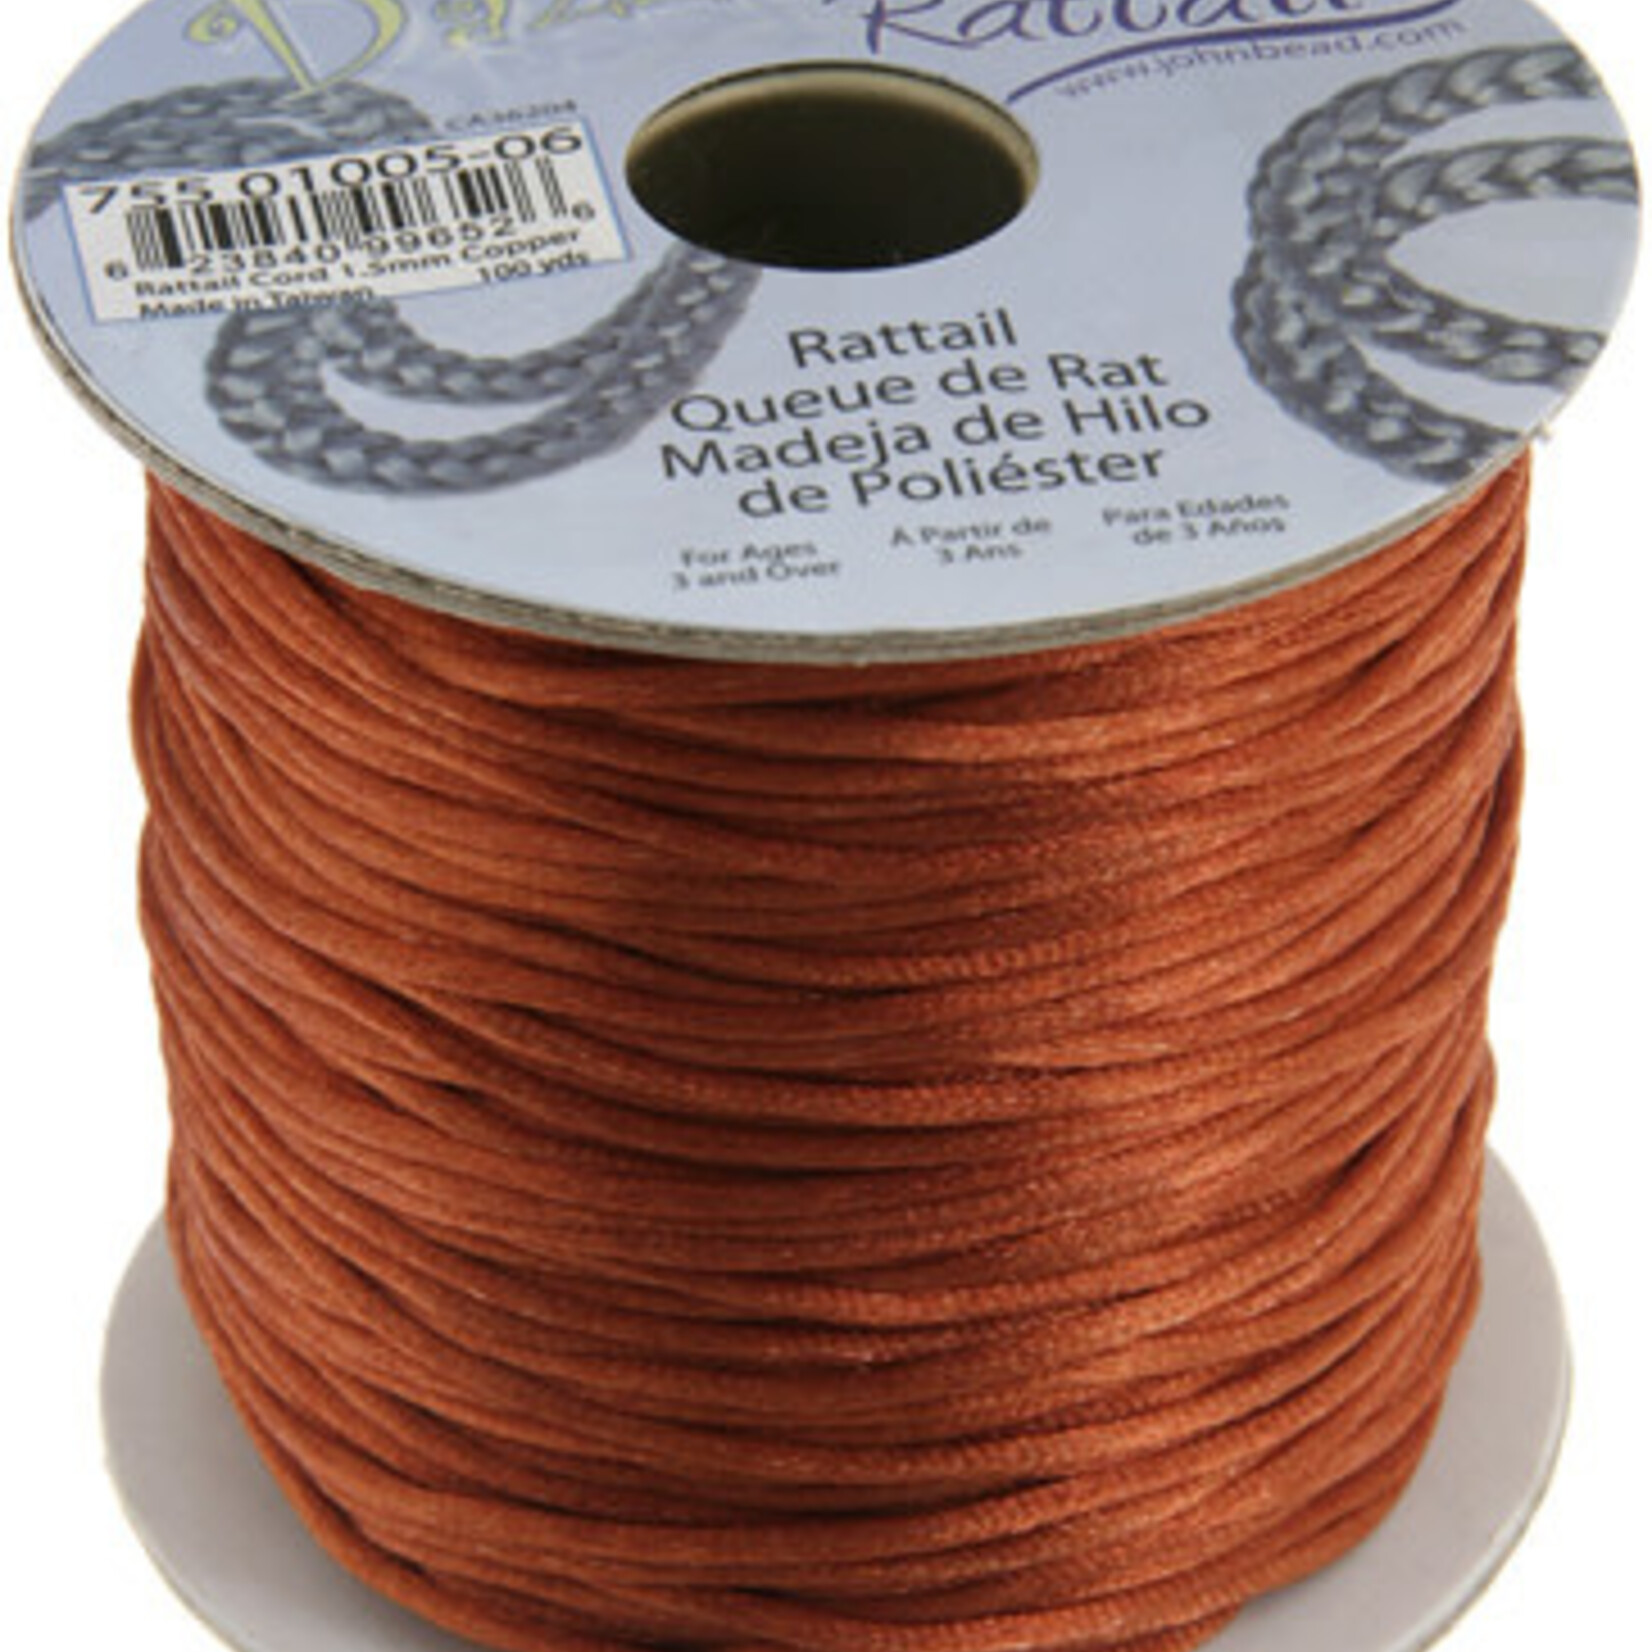 Rattail Cord 1.5mm (100 yards)  Copper